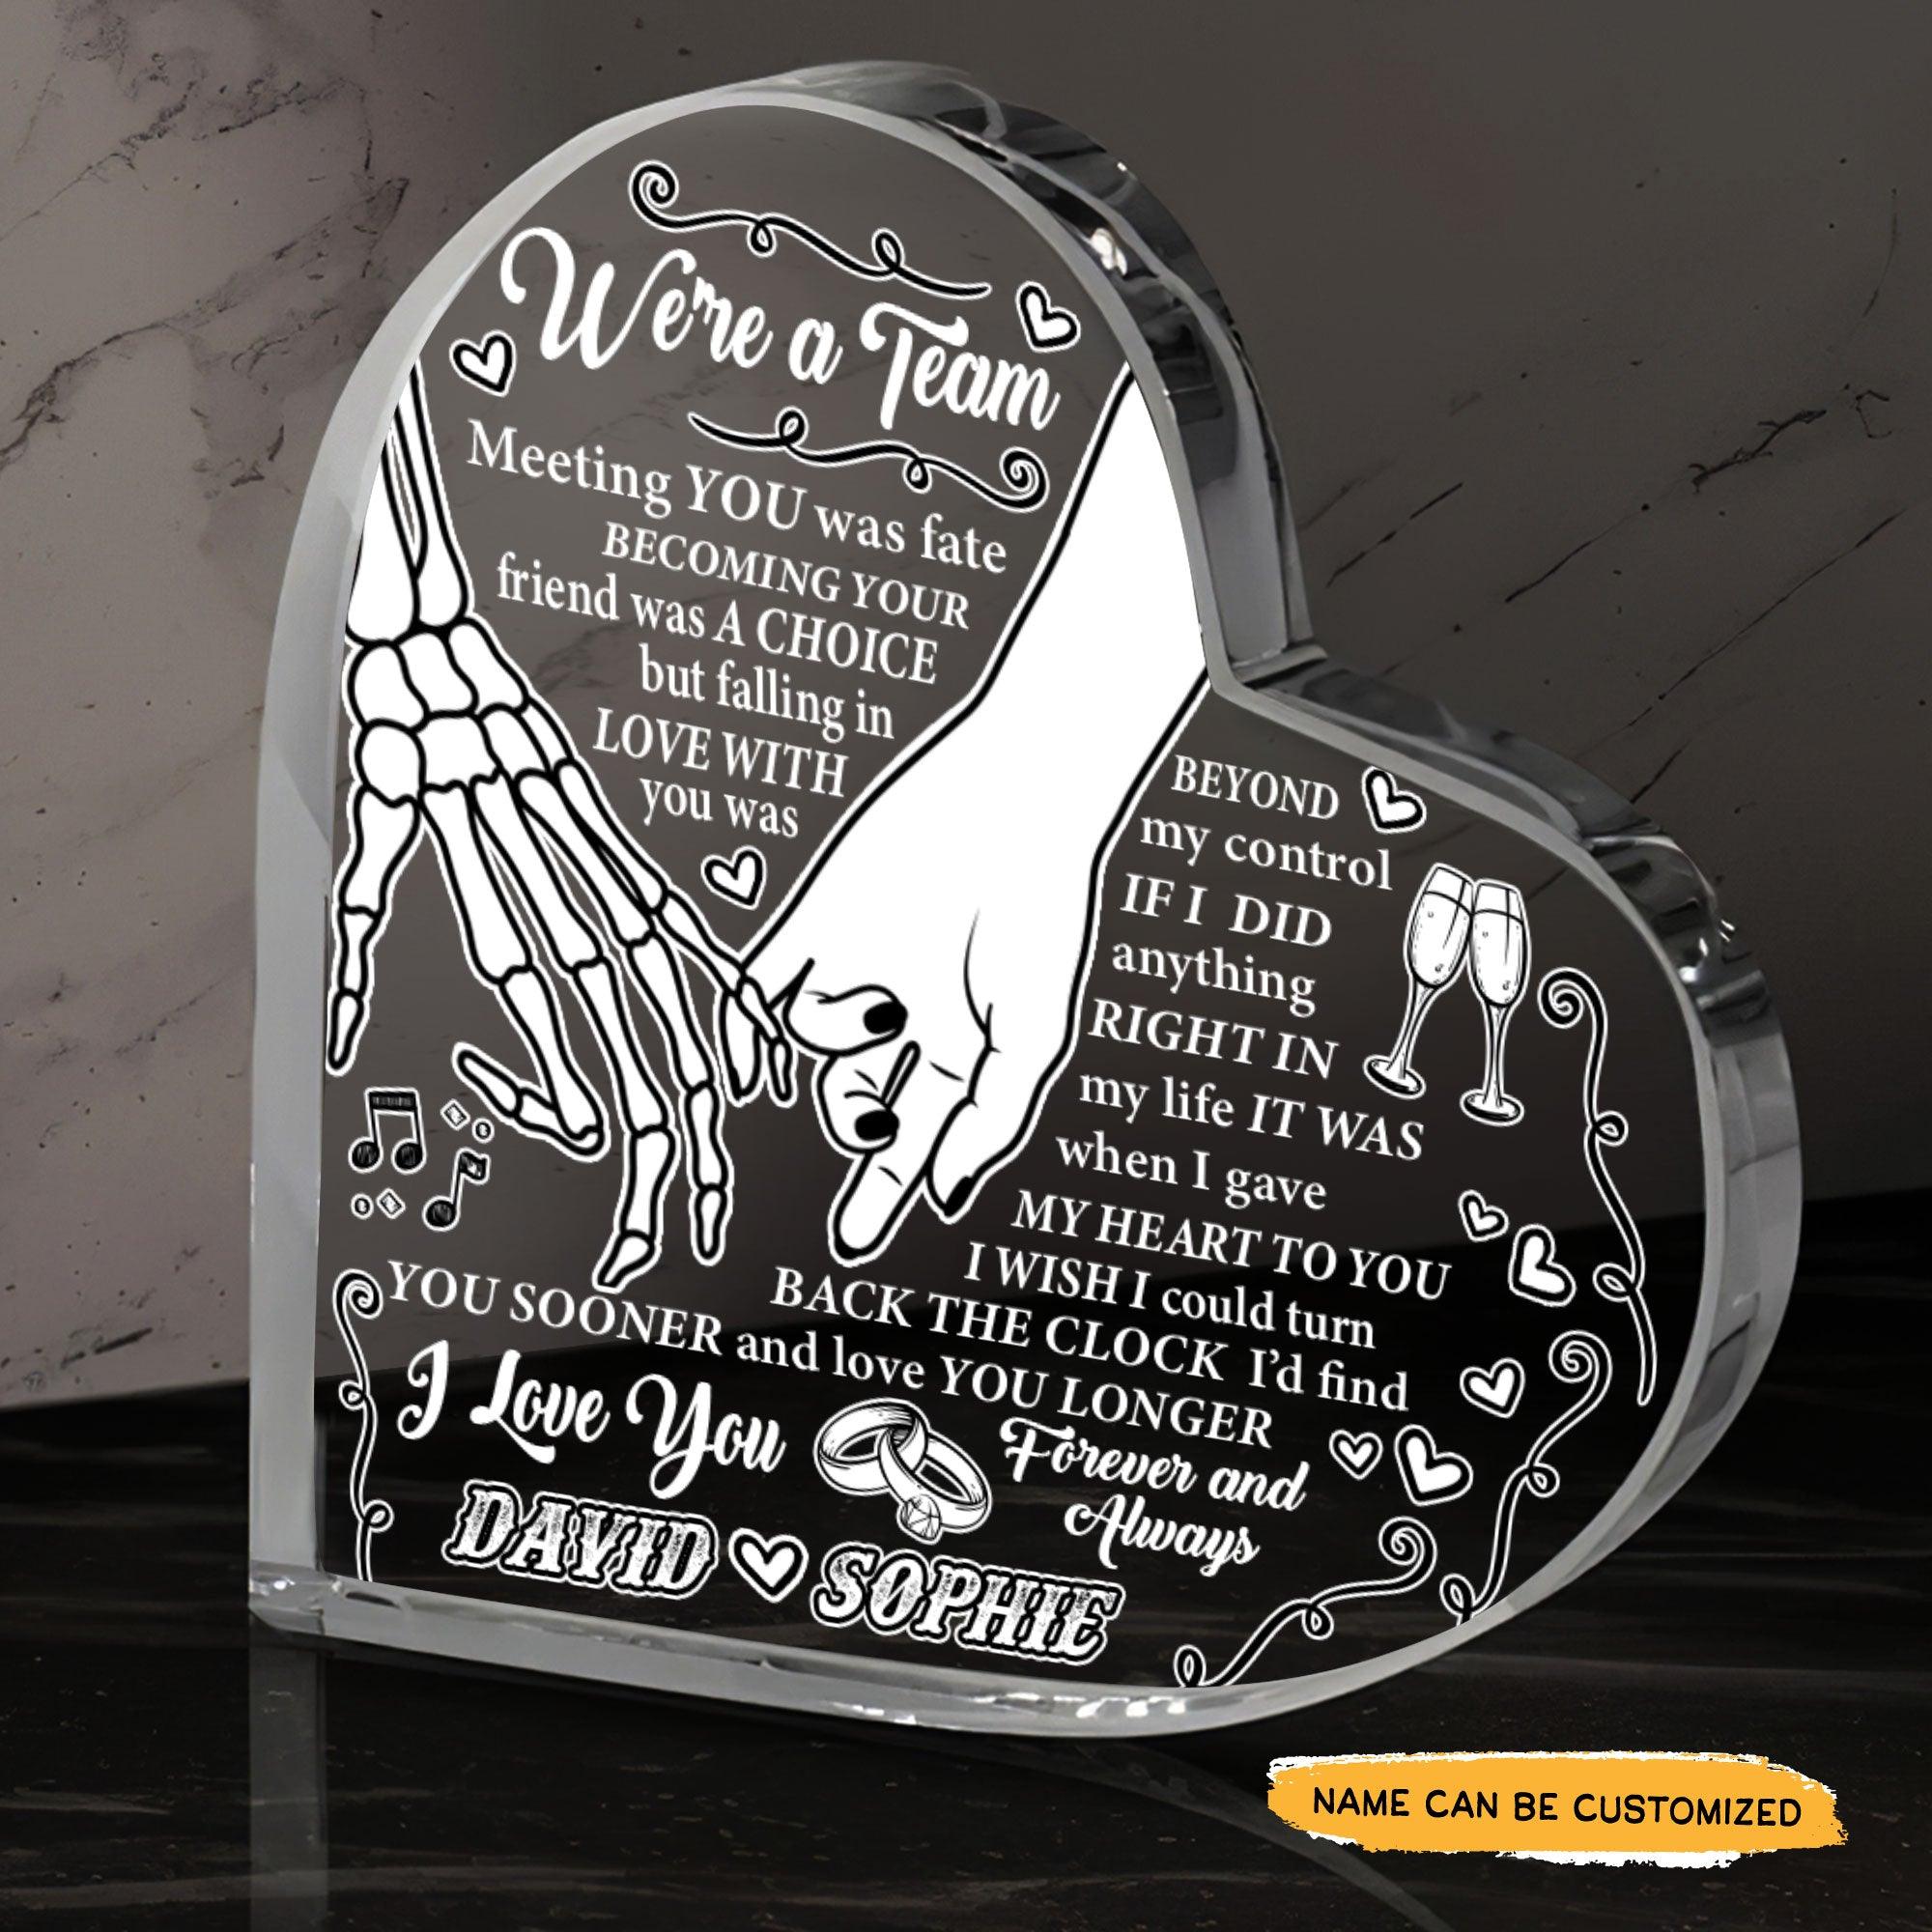 Were a Team - Customized Skull Couple Crystal Heart Anniversary Gifts - Wonder Skull